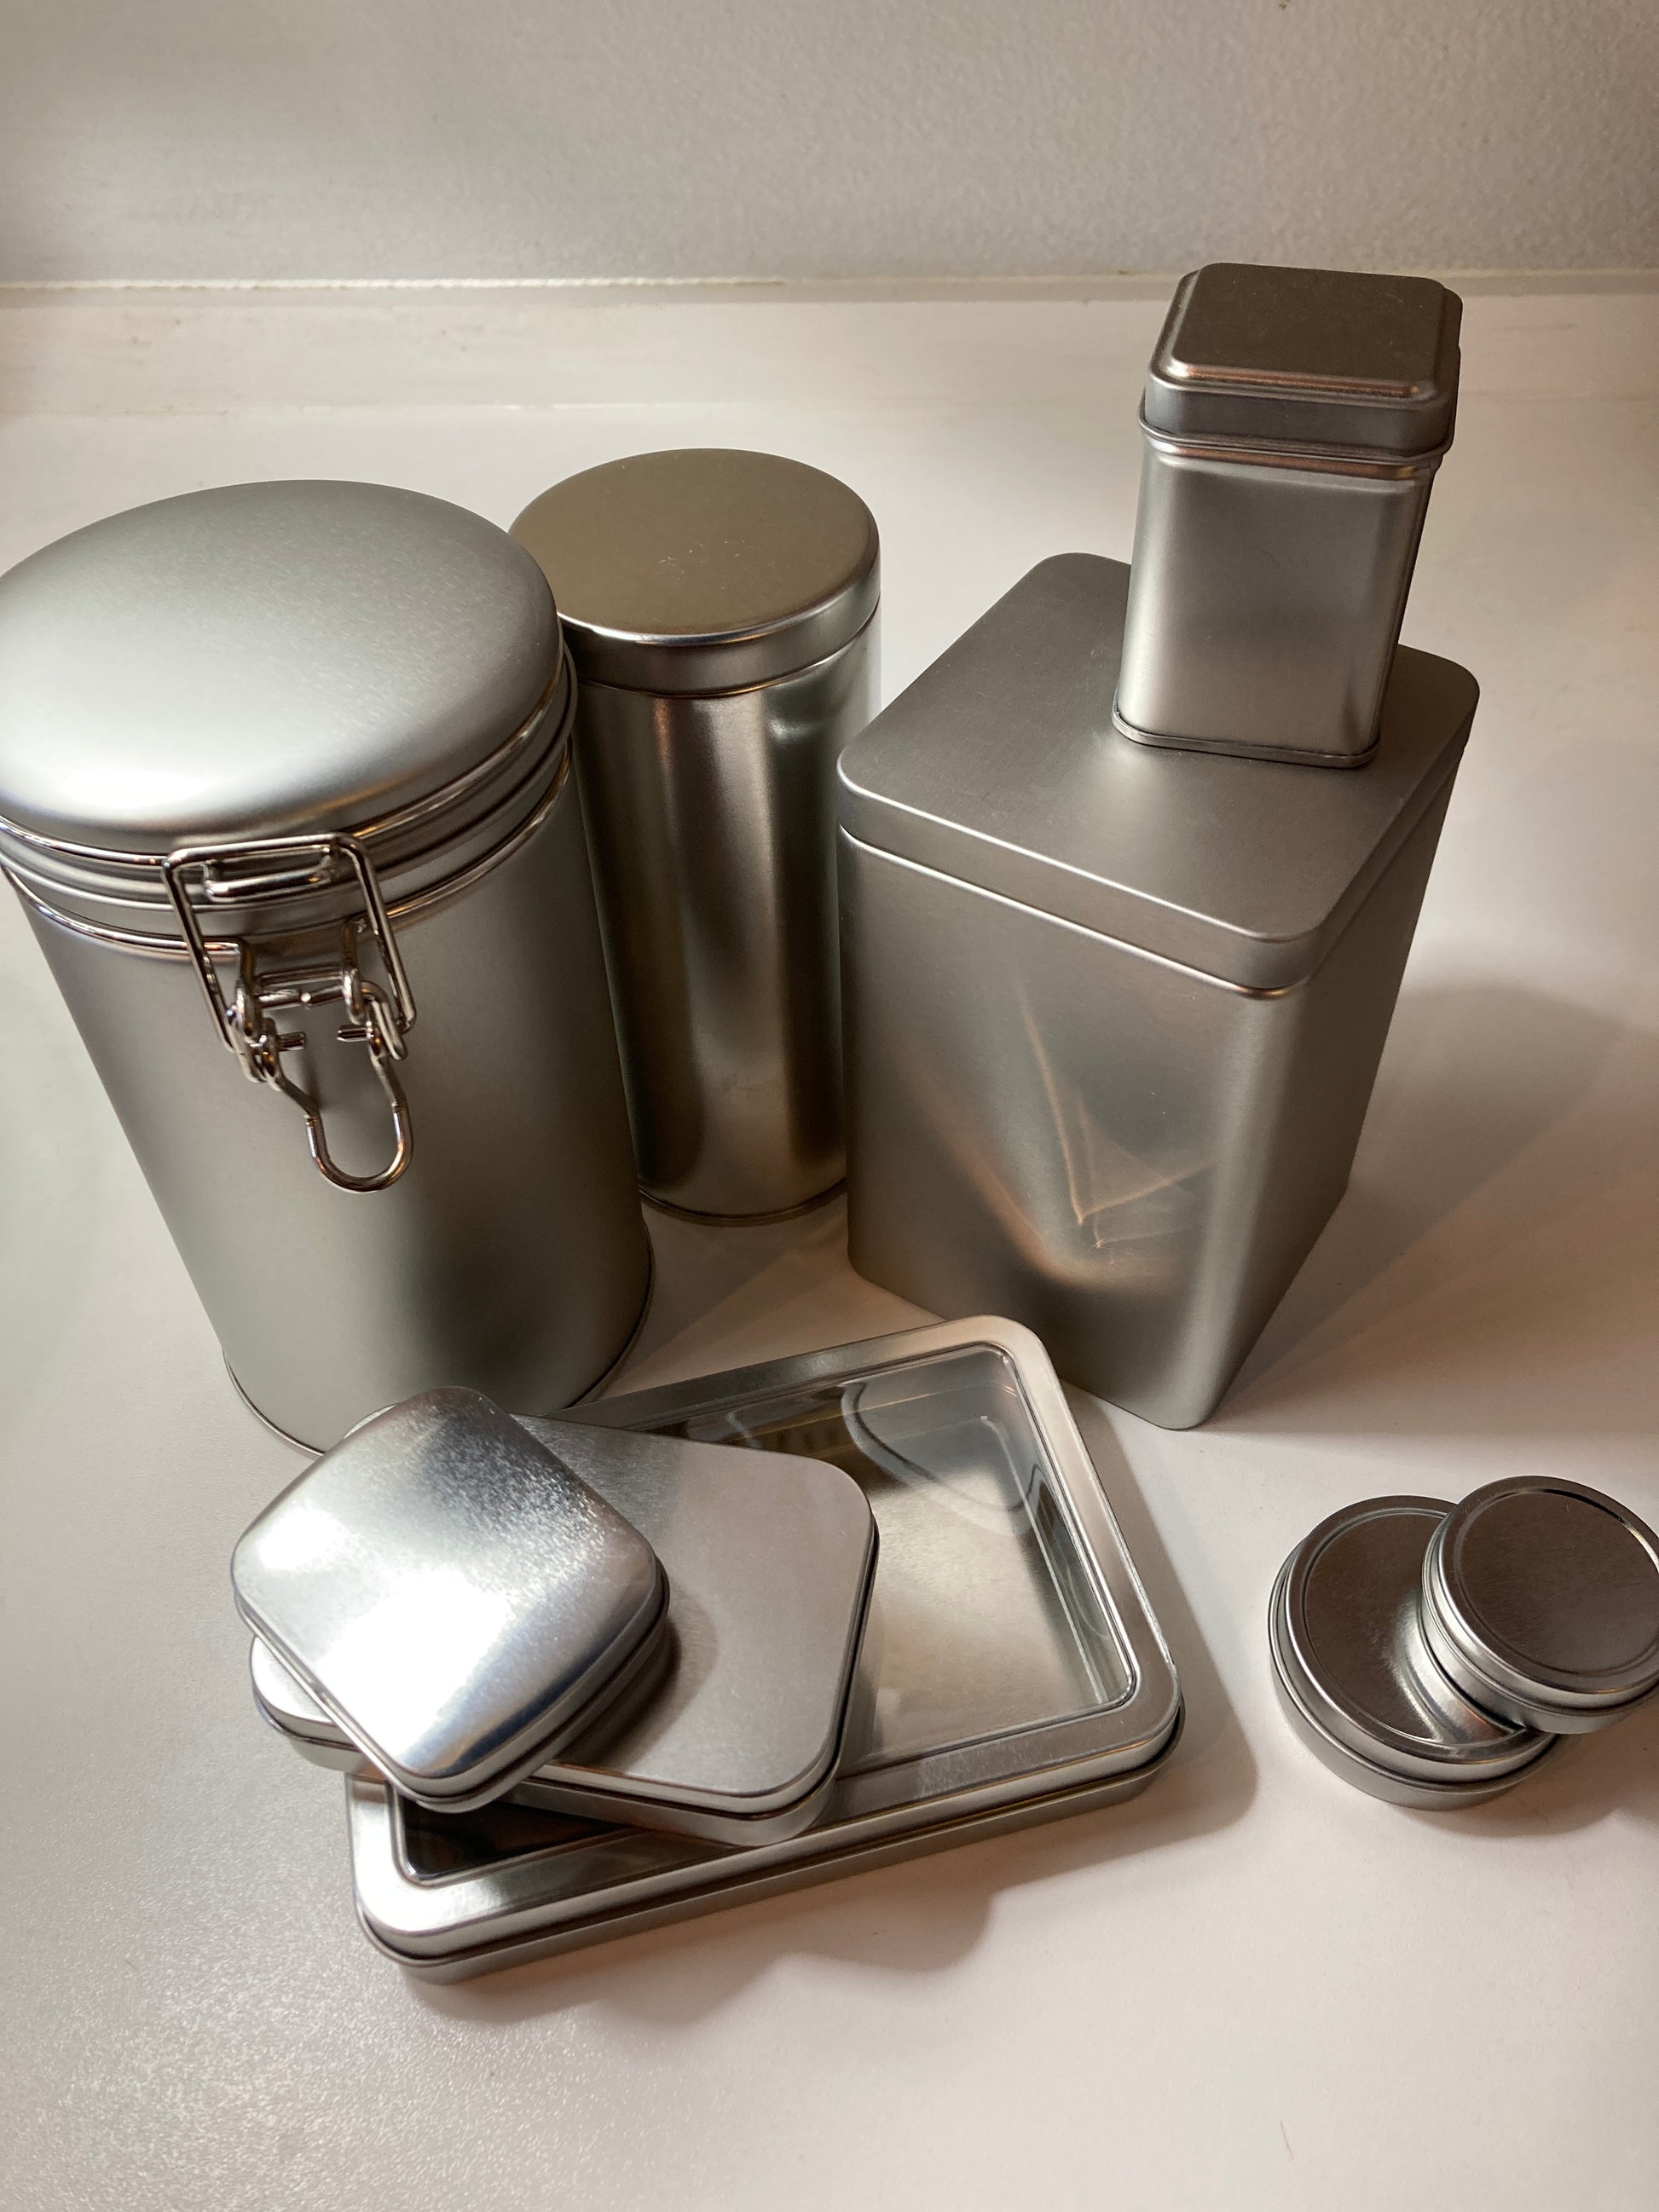 Tin Containers